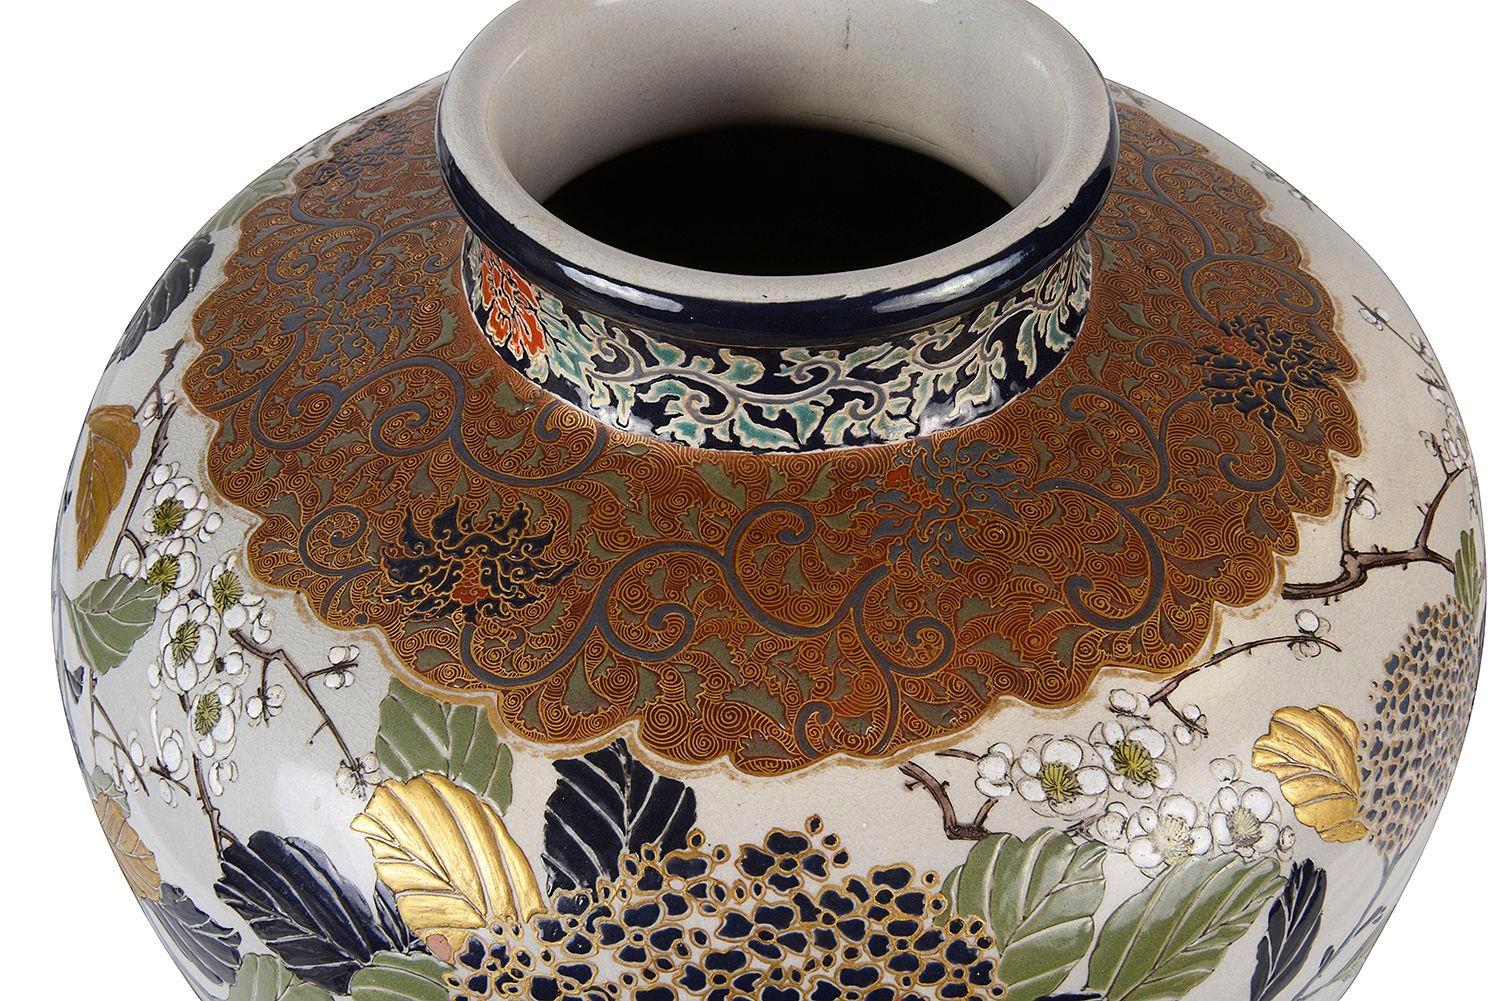 A fine quality and imposing late 19th Century Japanese Imperial Satsuma vase. Having a cobalt blue ground, scrolling gilded foliate decoration to the colar, the central hand painted band depicting wonderful blossom trees and exotic flowers. The